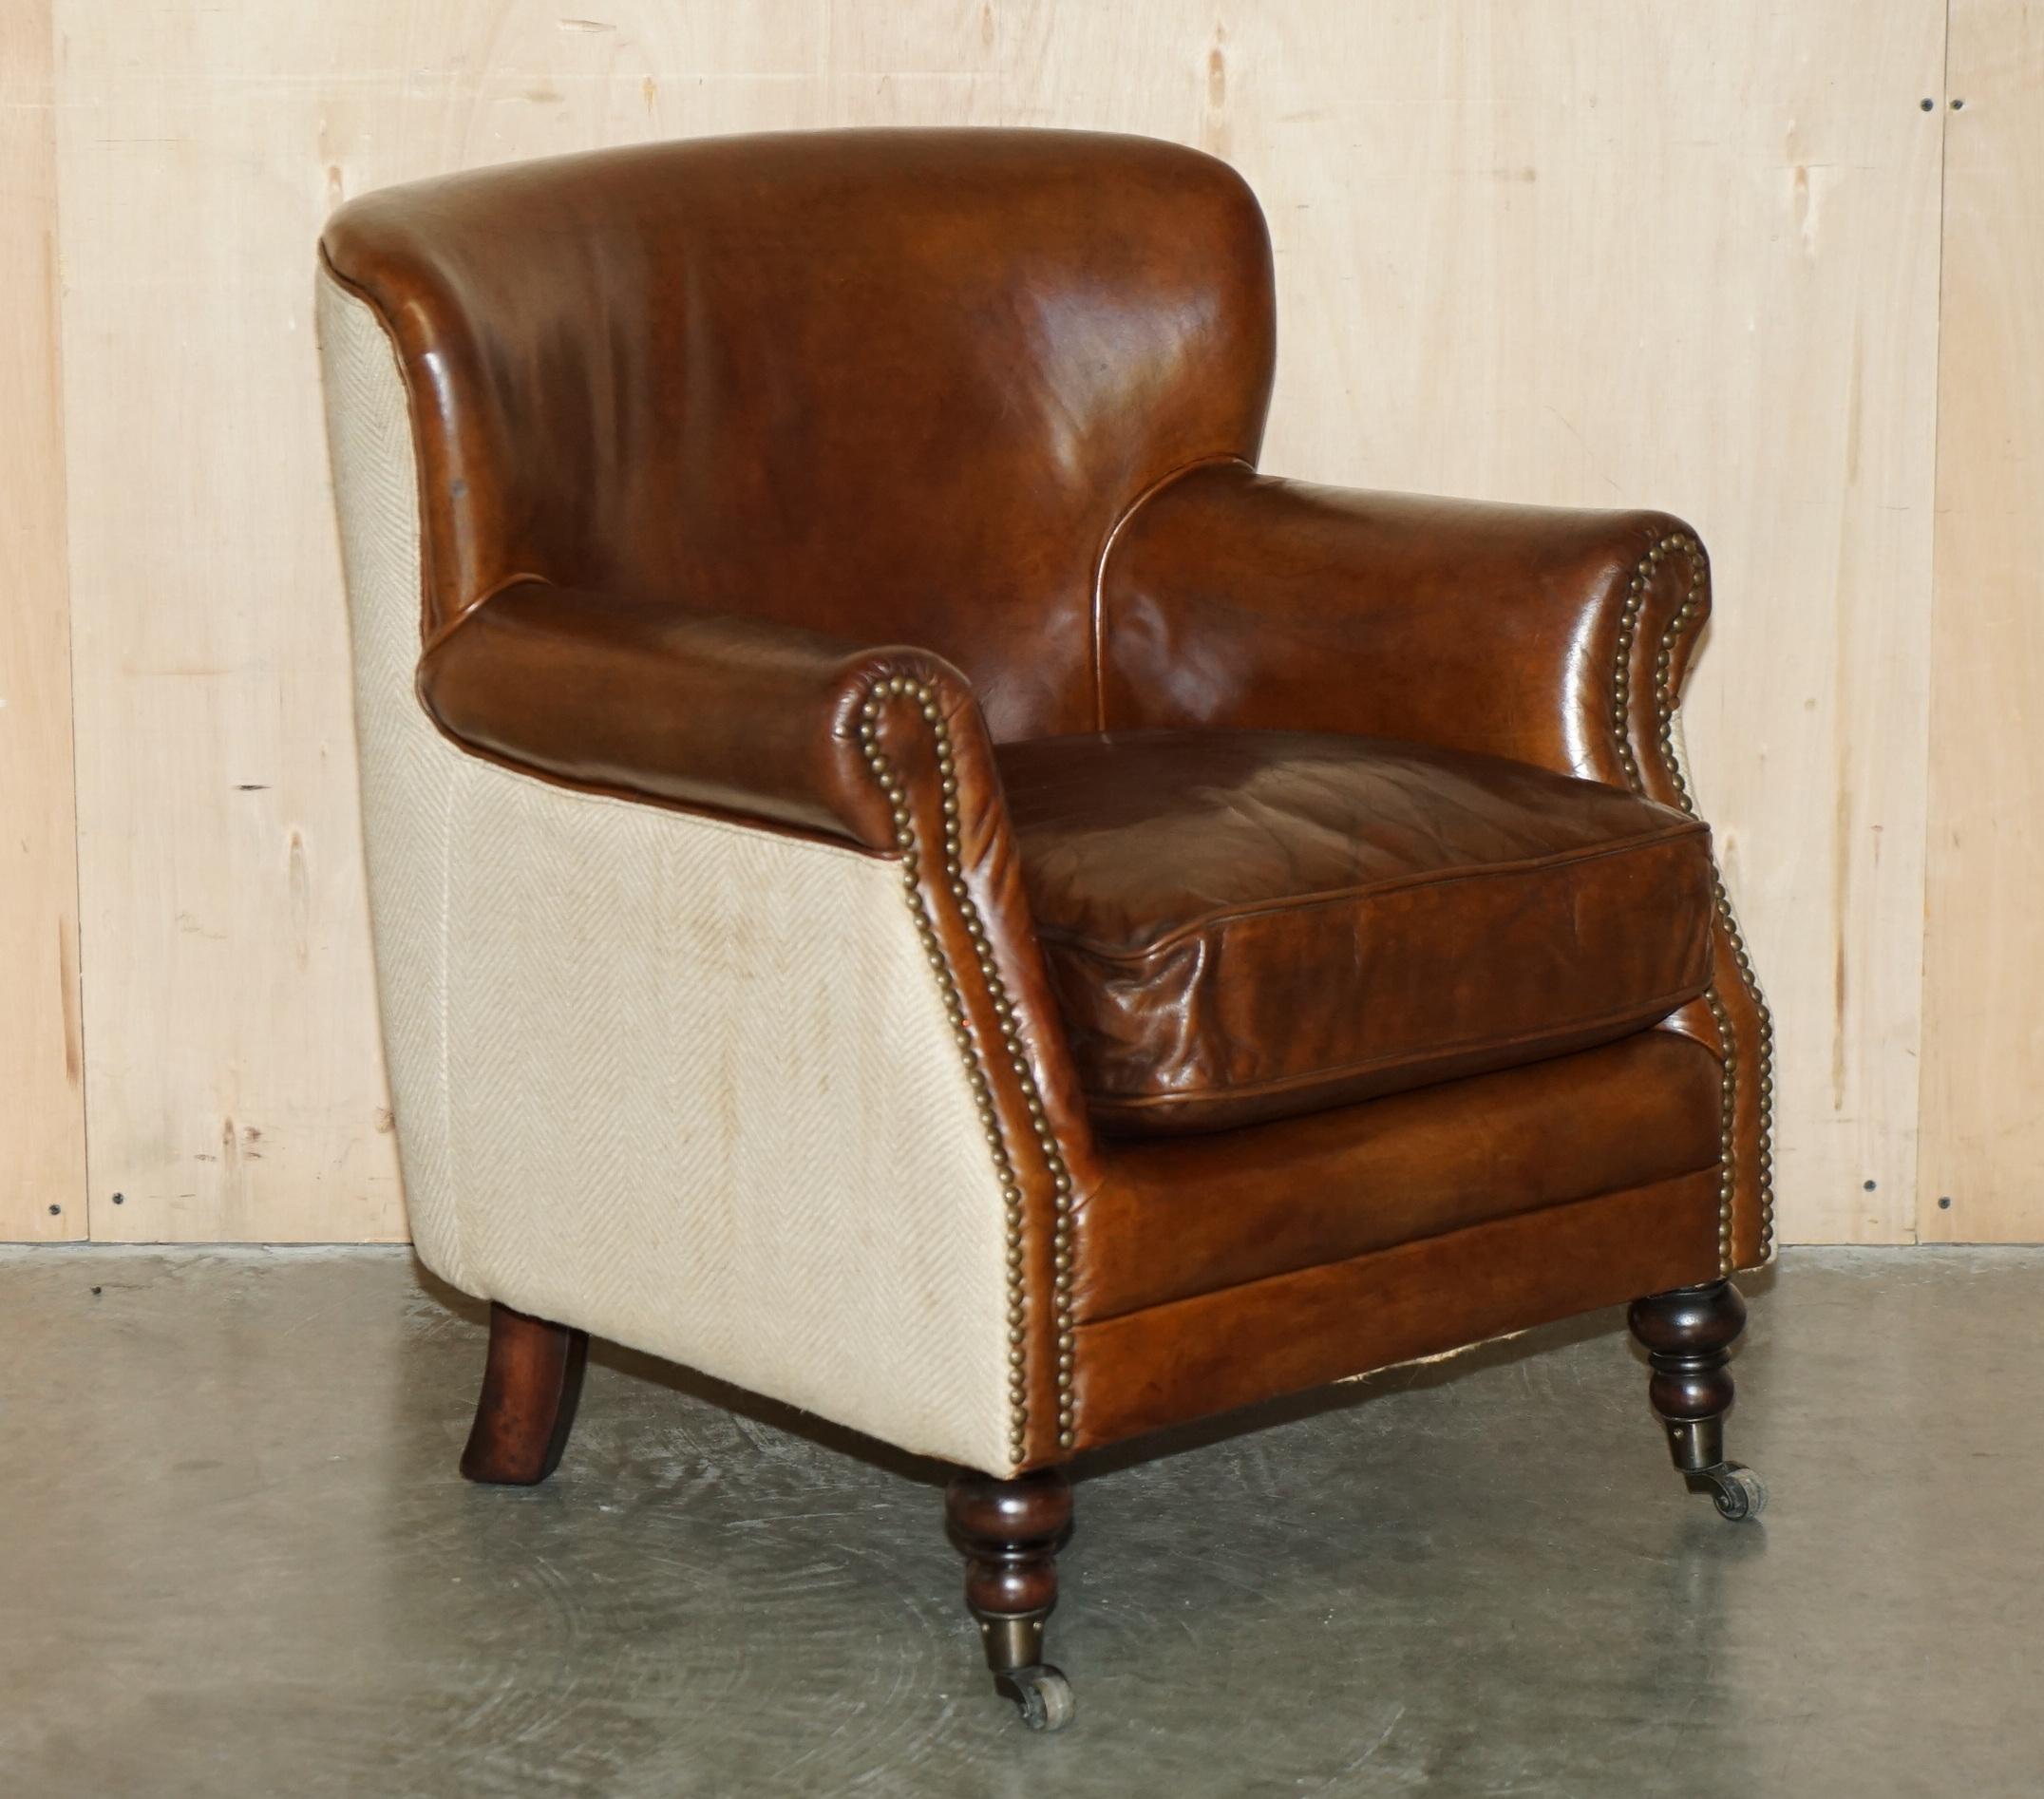 Royal House Antiques

Royal House Antiques is delighted to offer for sale this stunning very comfortable Little Professor style club armchair in Heritage brown leather mixed with Herringbone wool

Please note the delivery fee listed is just a guide,